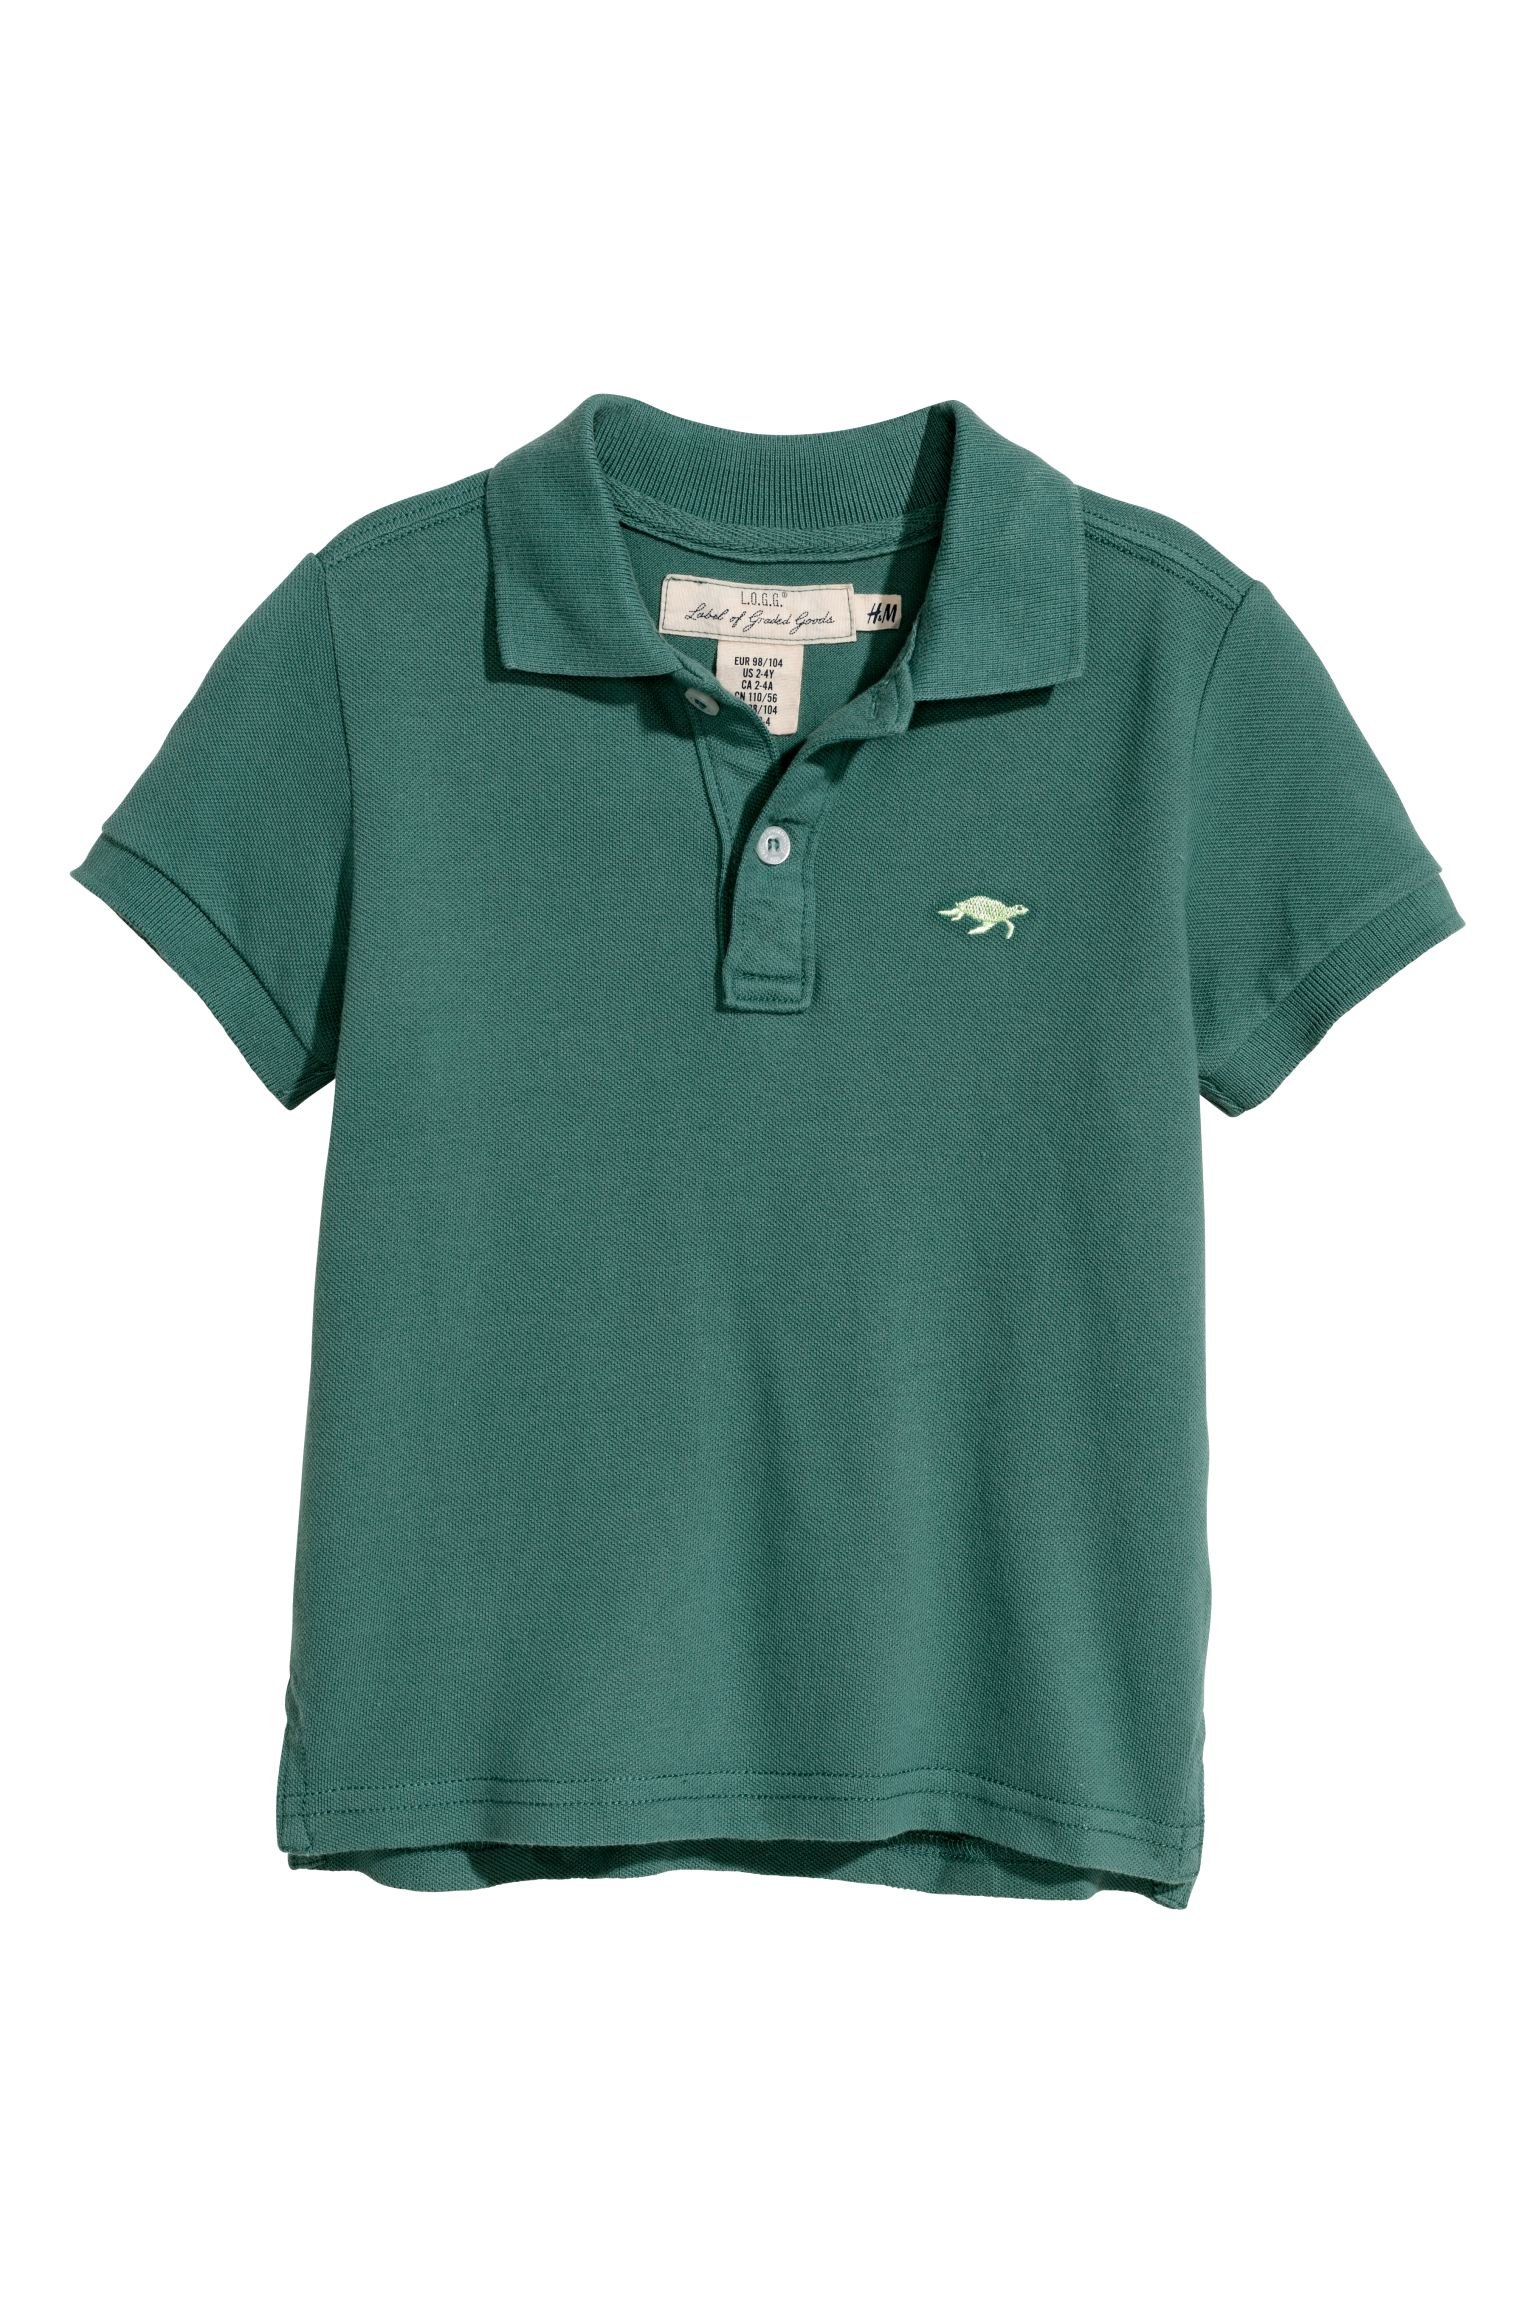 H&M Polo Shirt with Turtle Embroidery in Dark Green.jpg